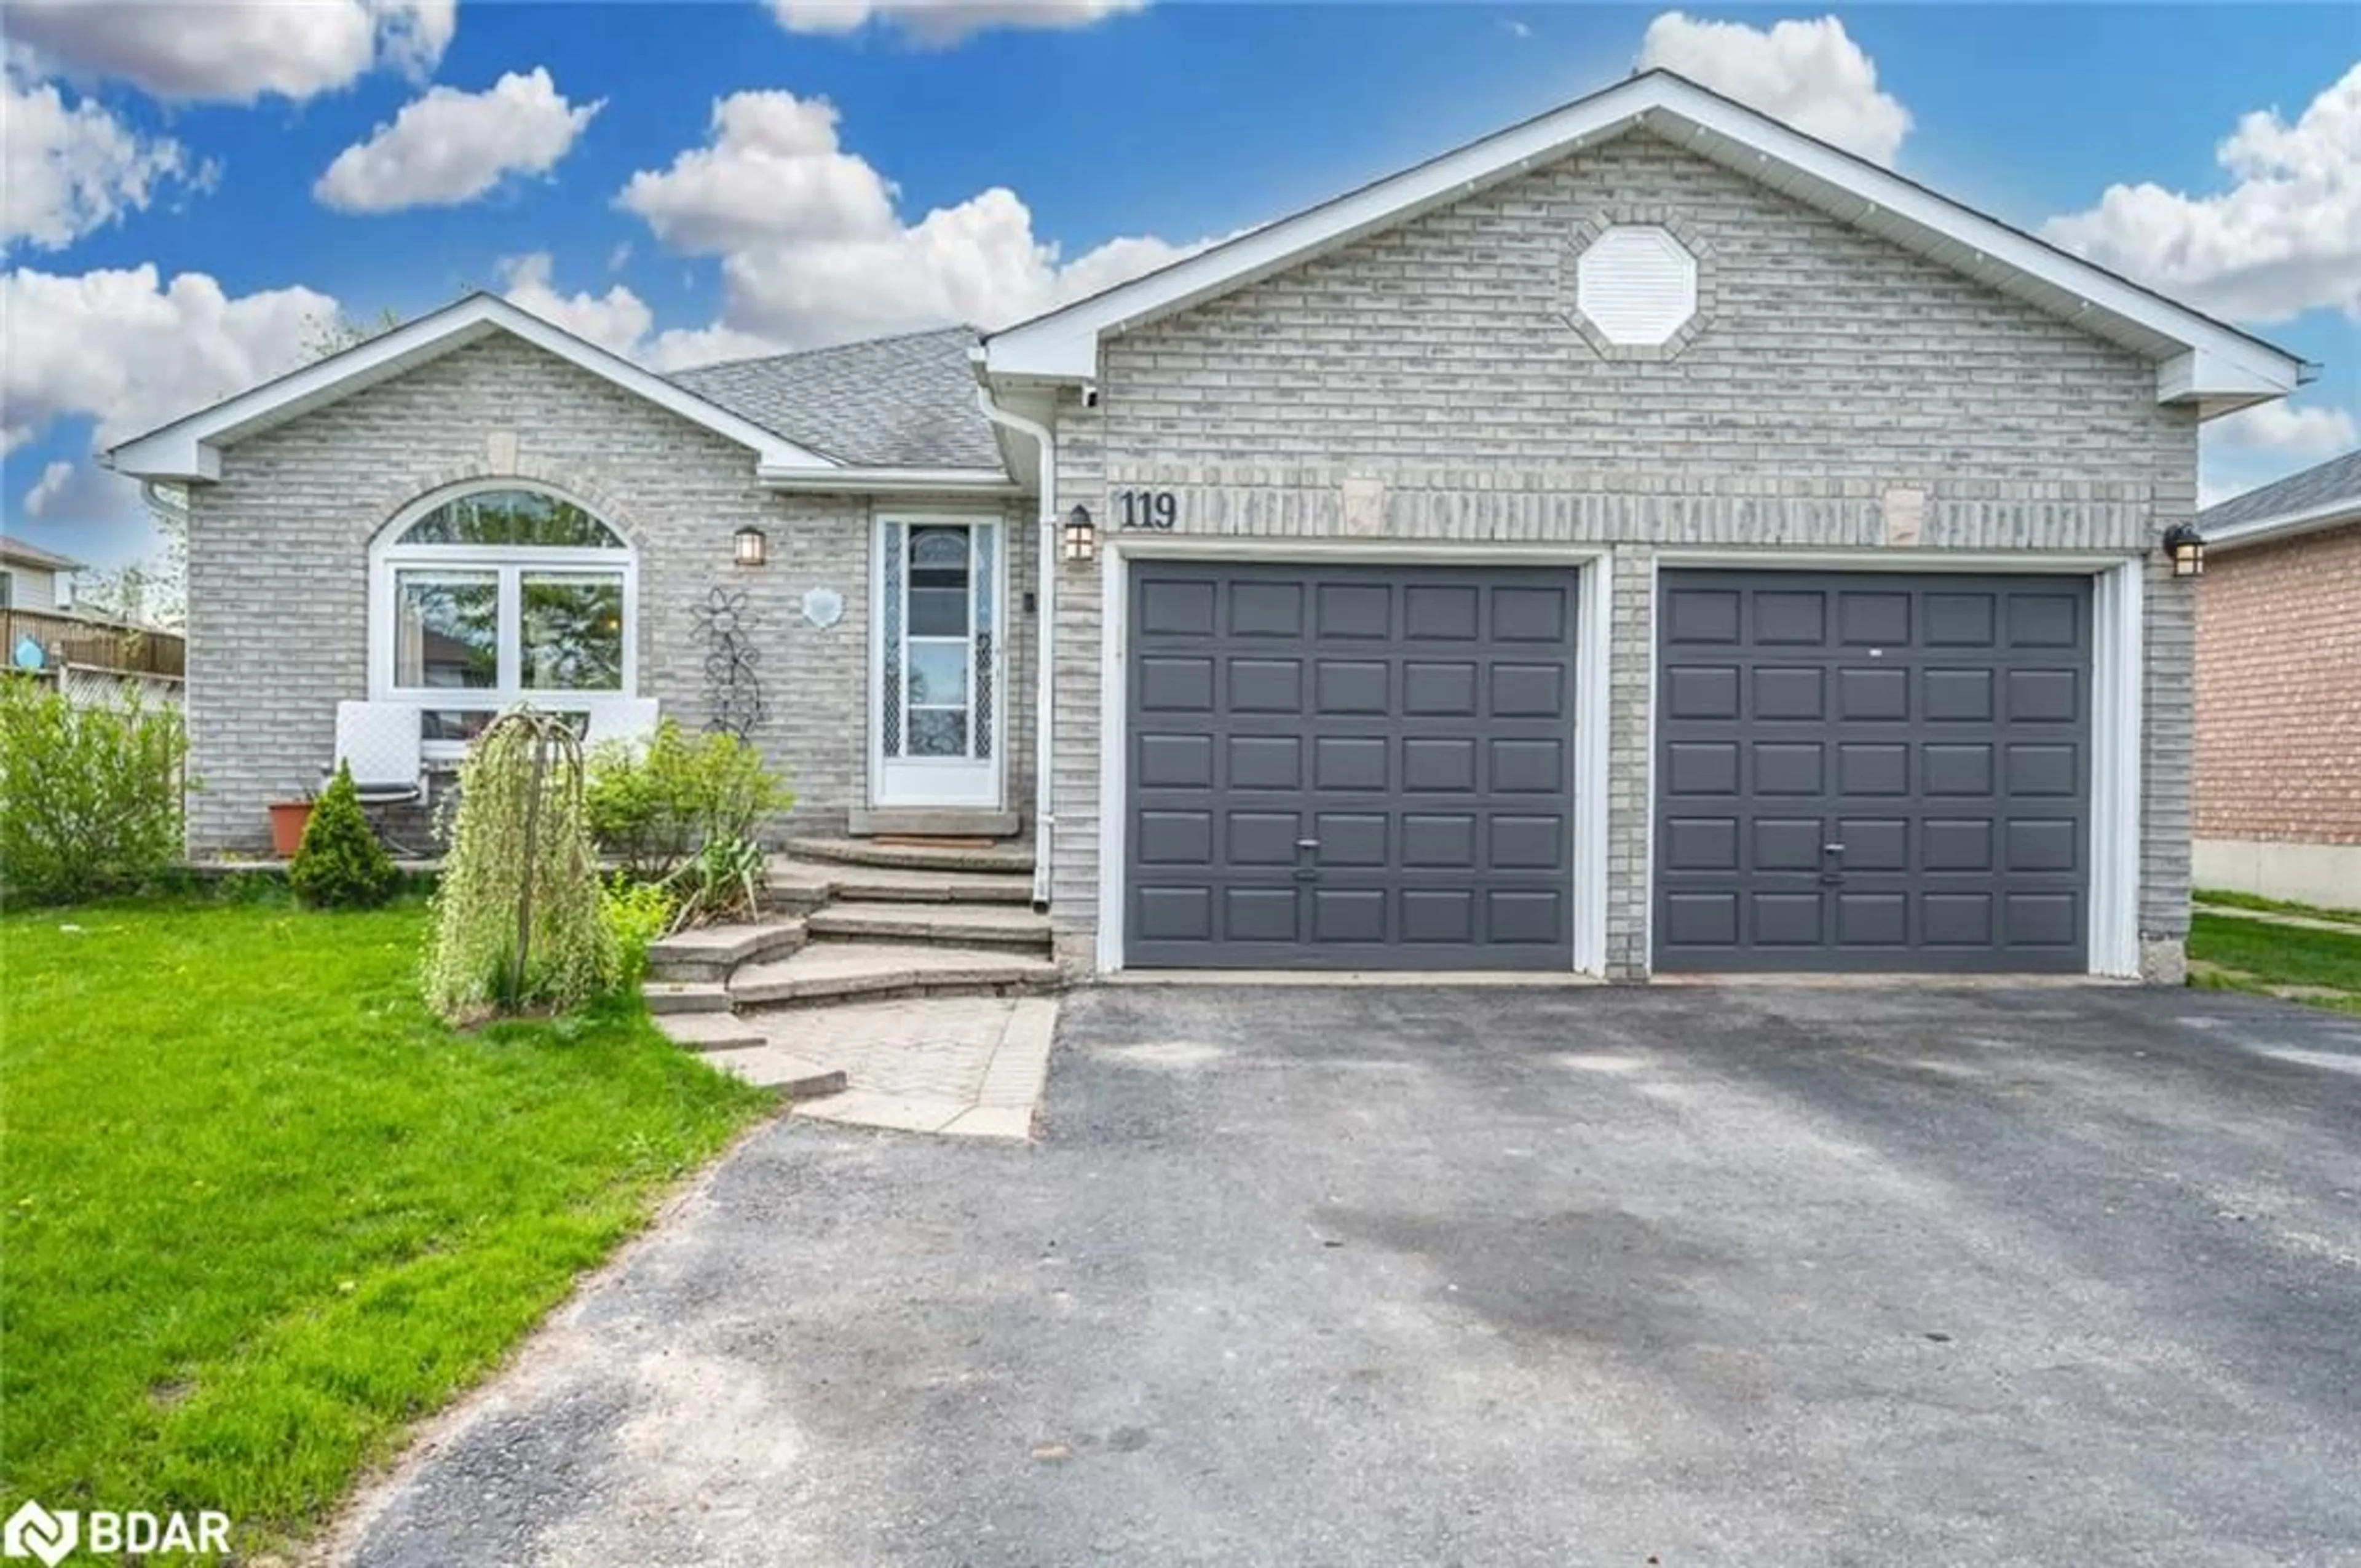 Frontside or backside of a home for 119 Hanmer St, Barrie Ontario L4N 7T5